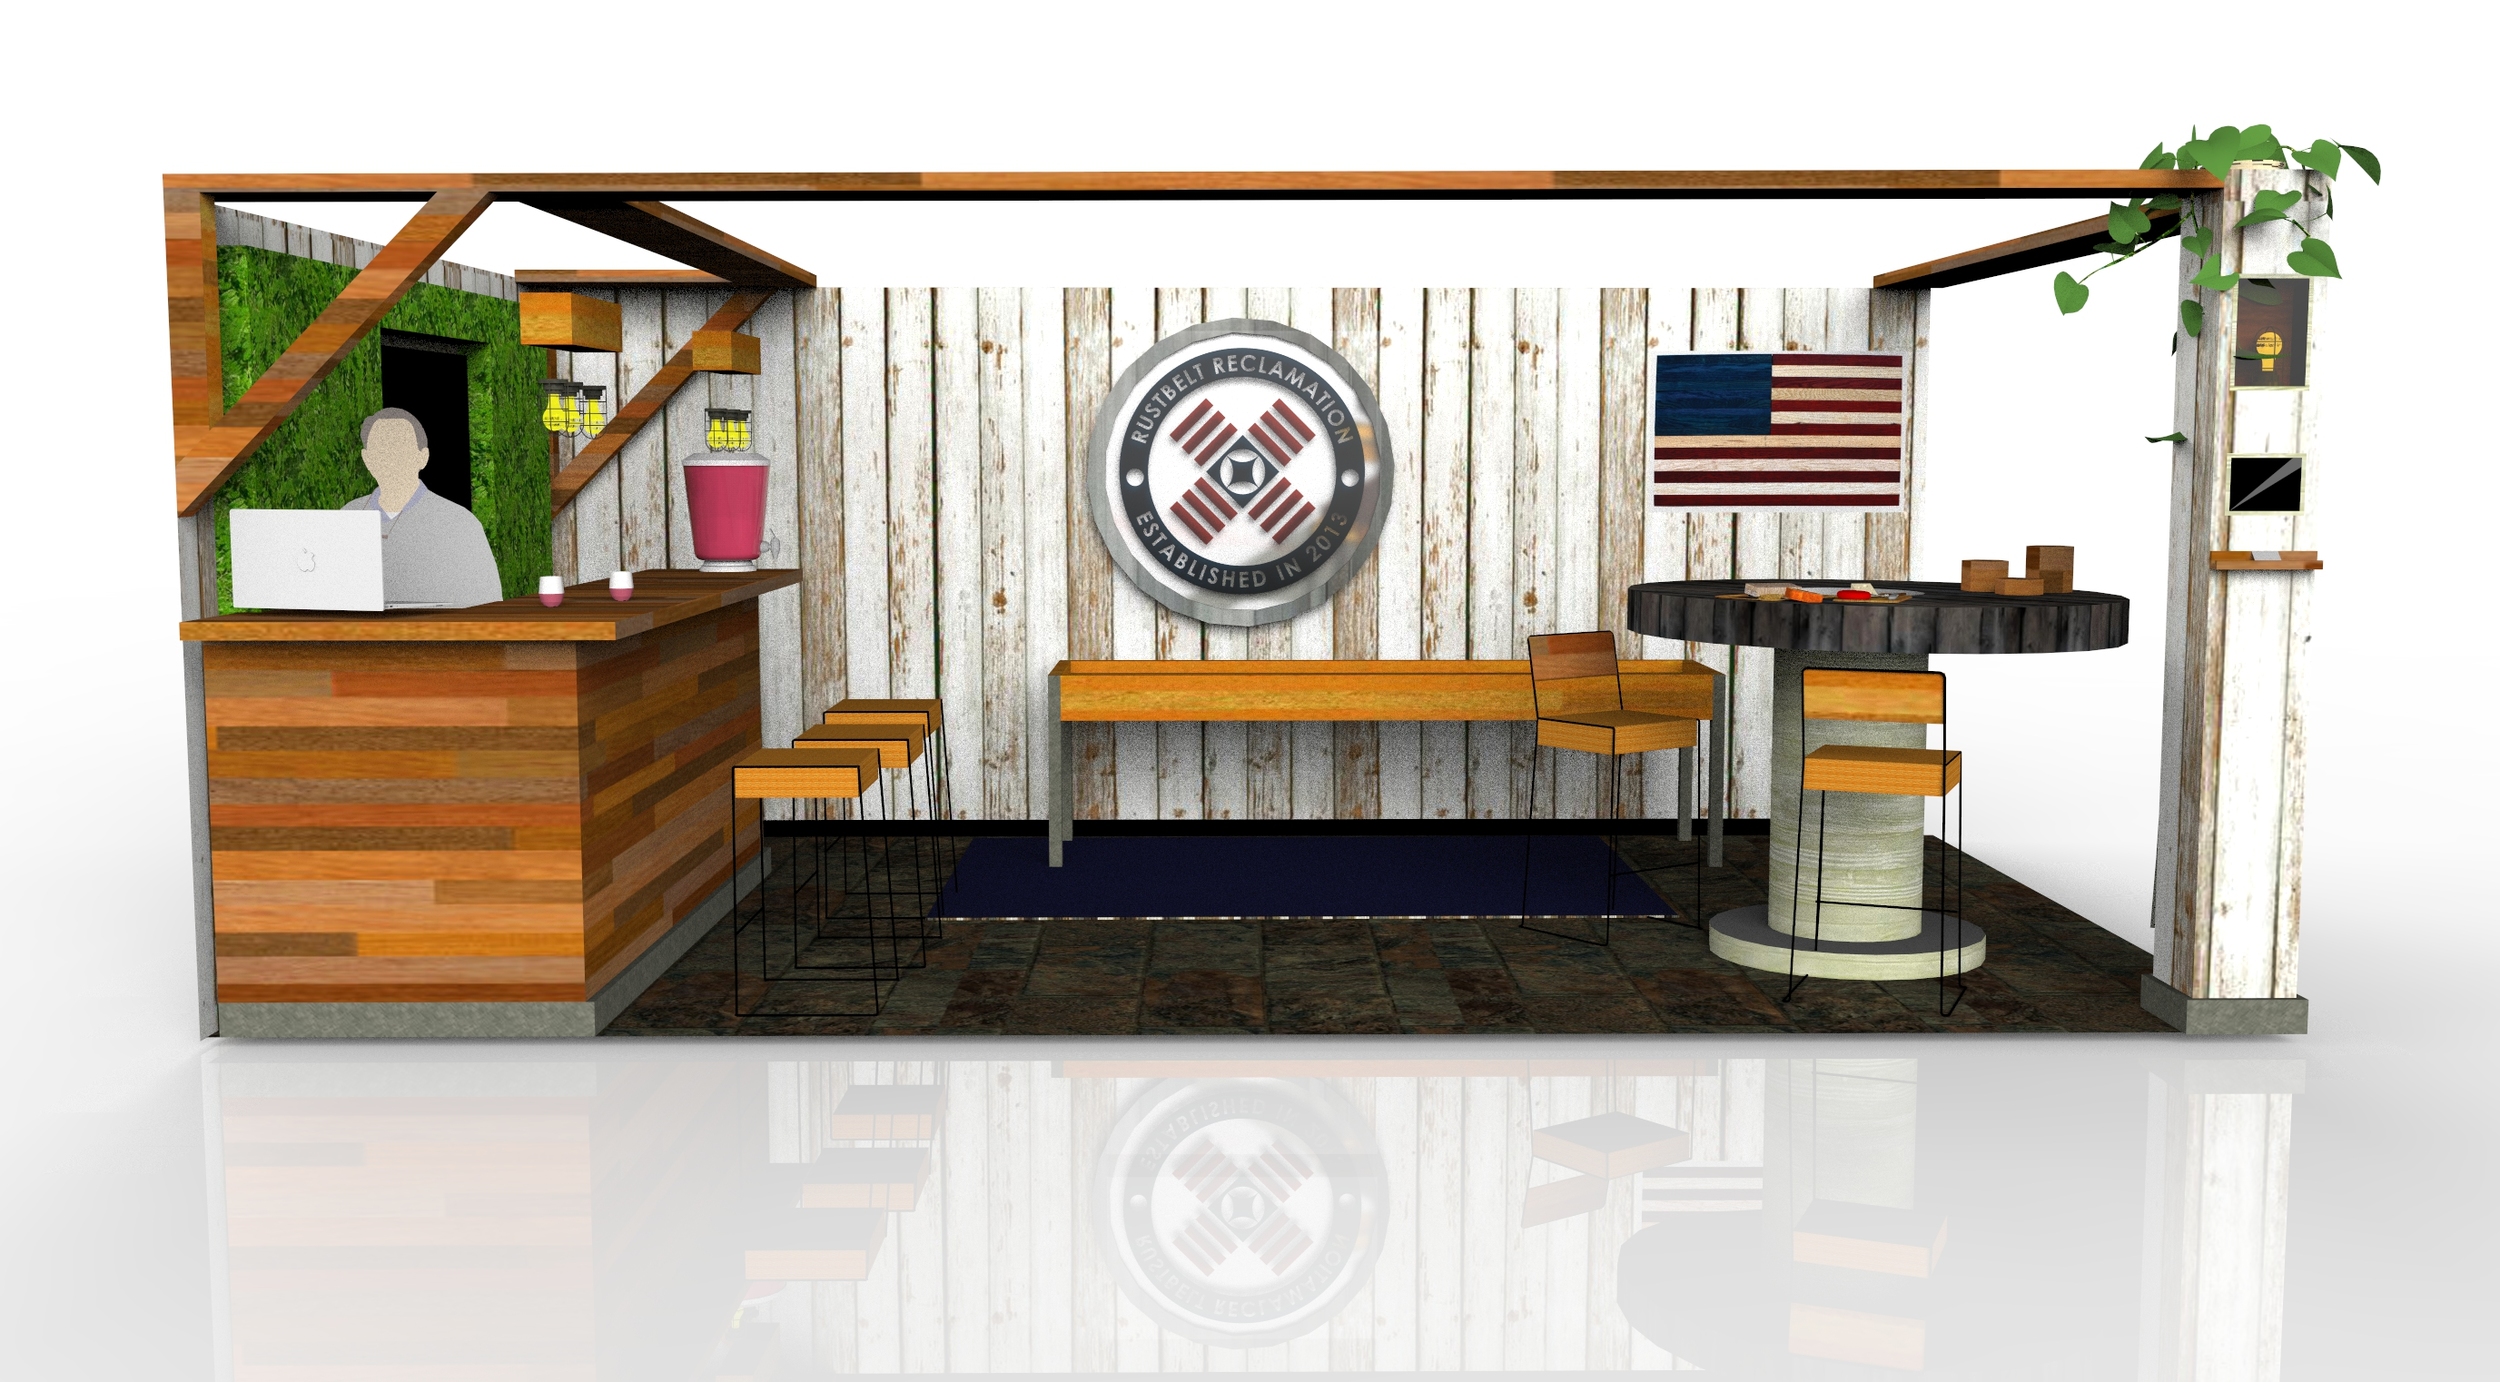 Trade Show Booth Render 2014.2.jpg